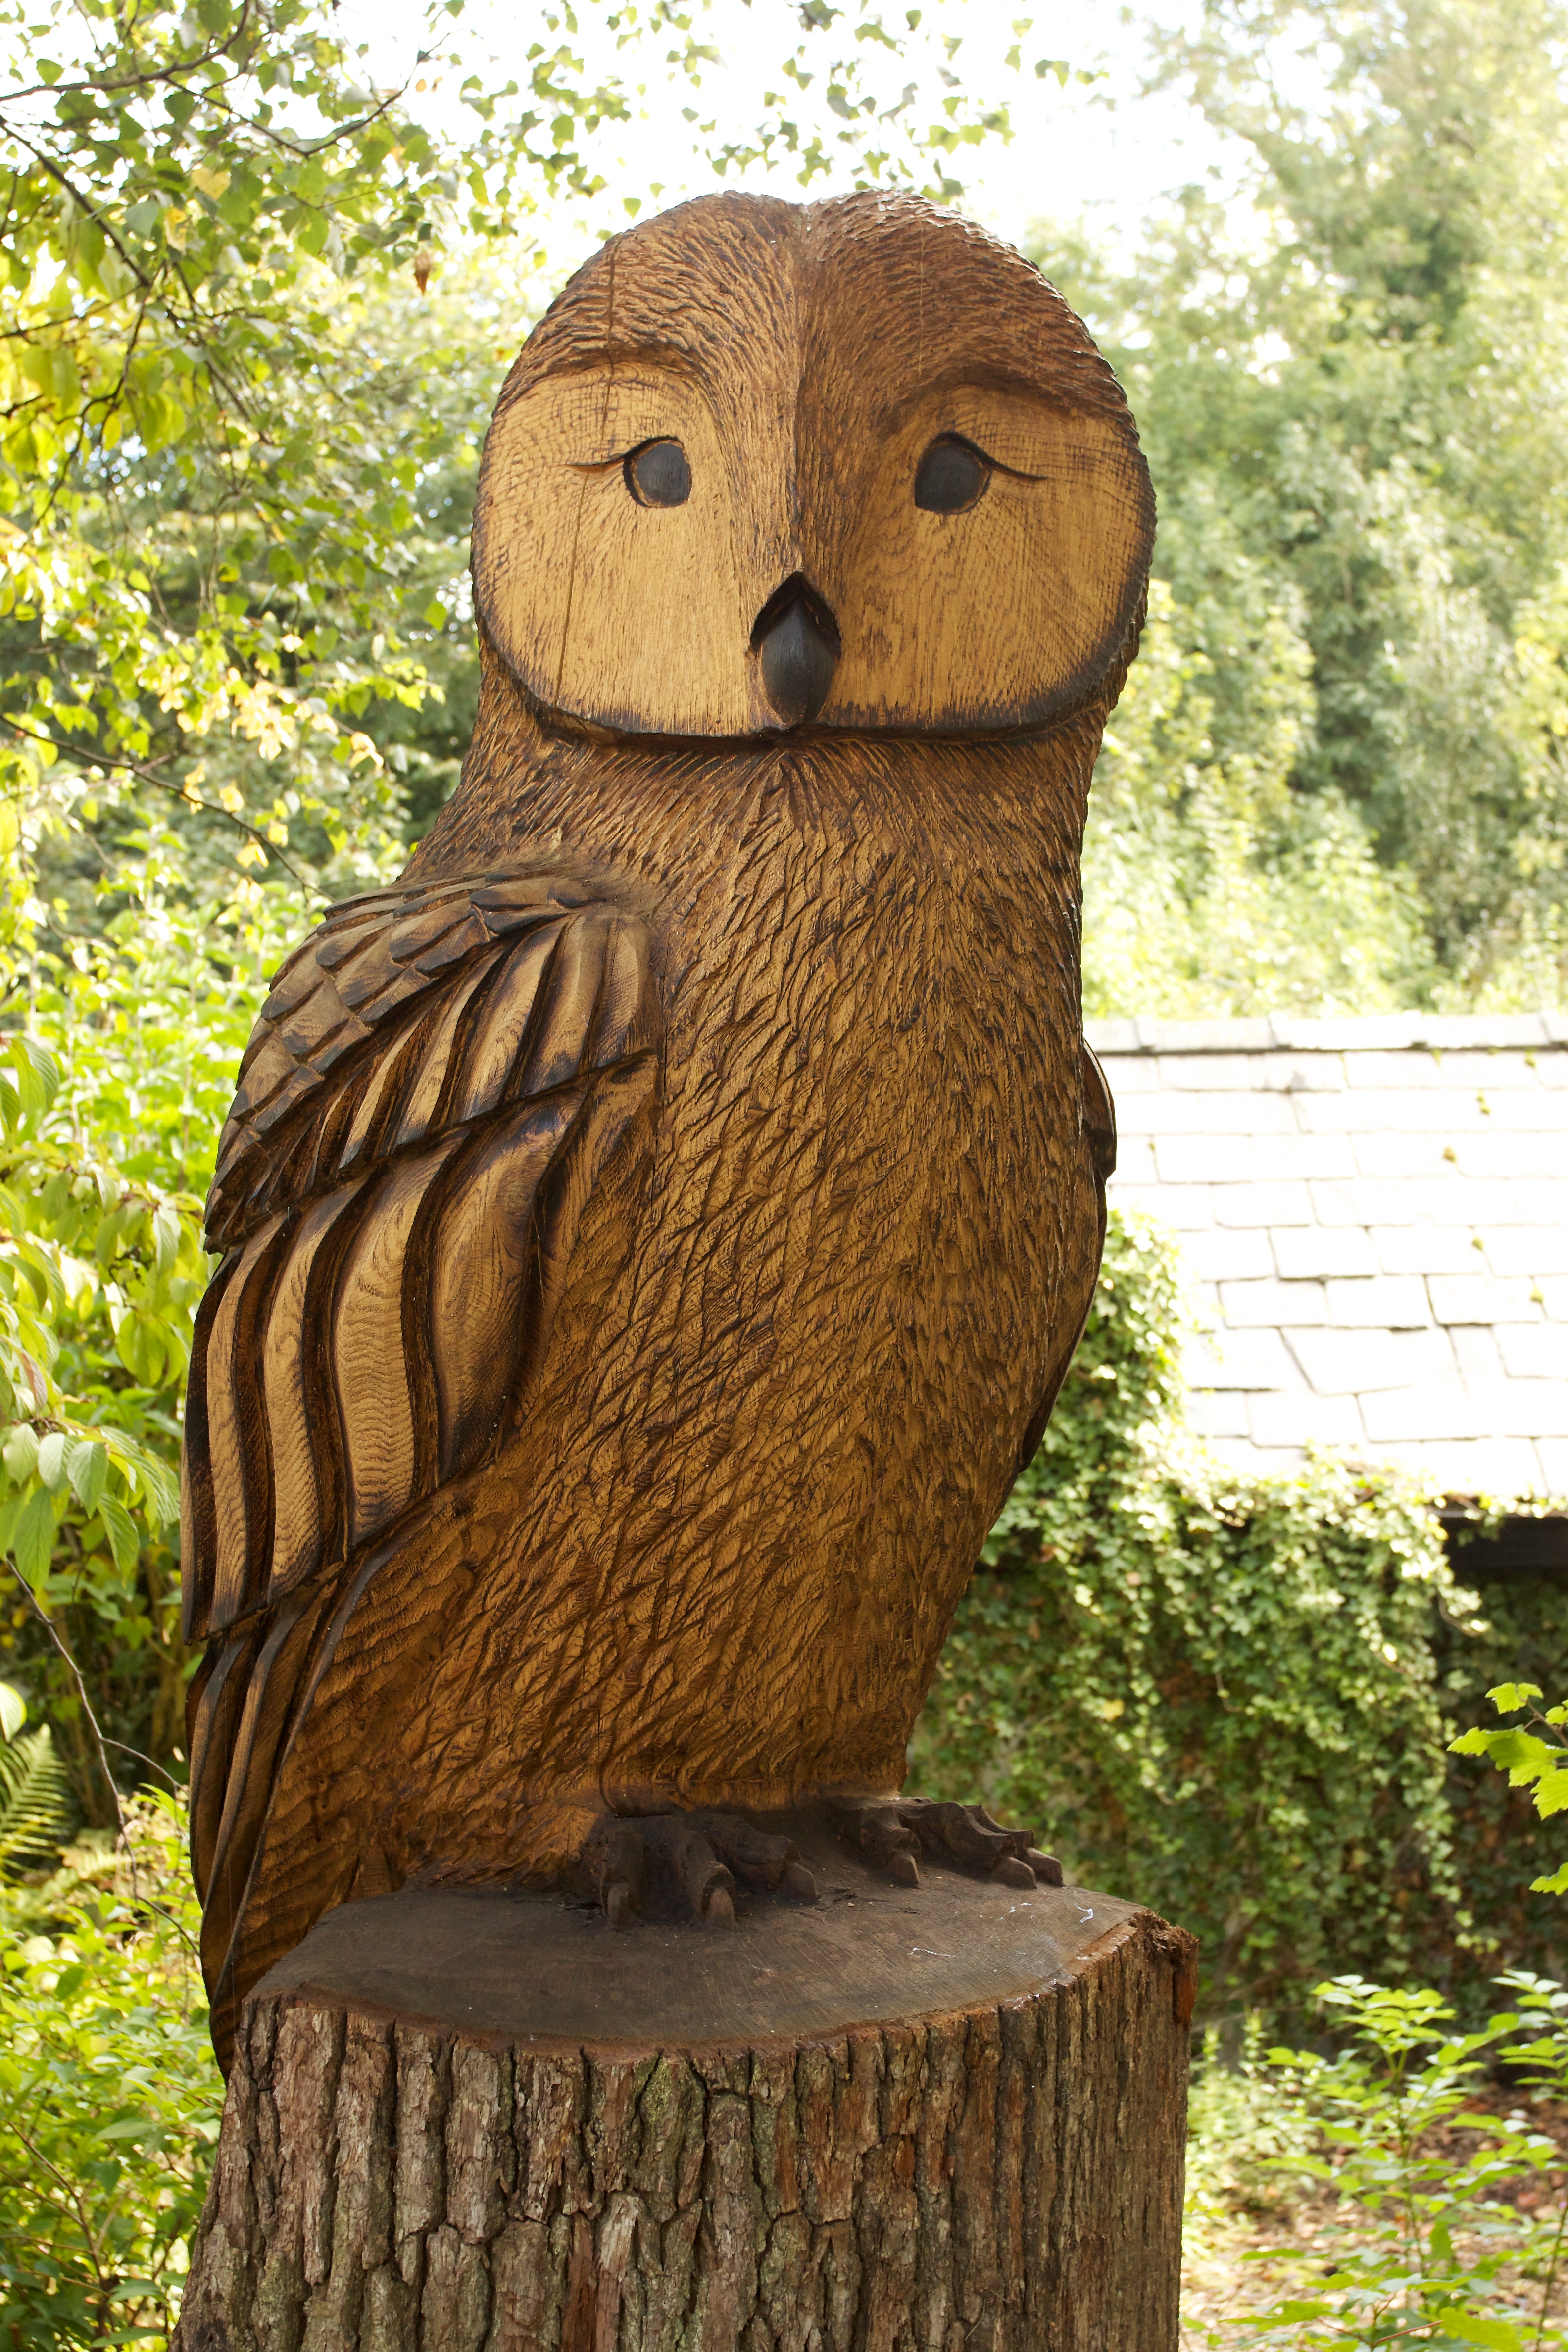 File:Wooden Owl carving at Prestbury Station.jpg - Wikimedia Commons